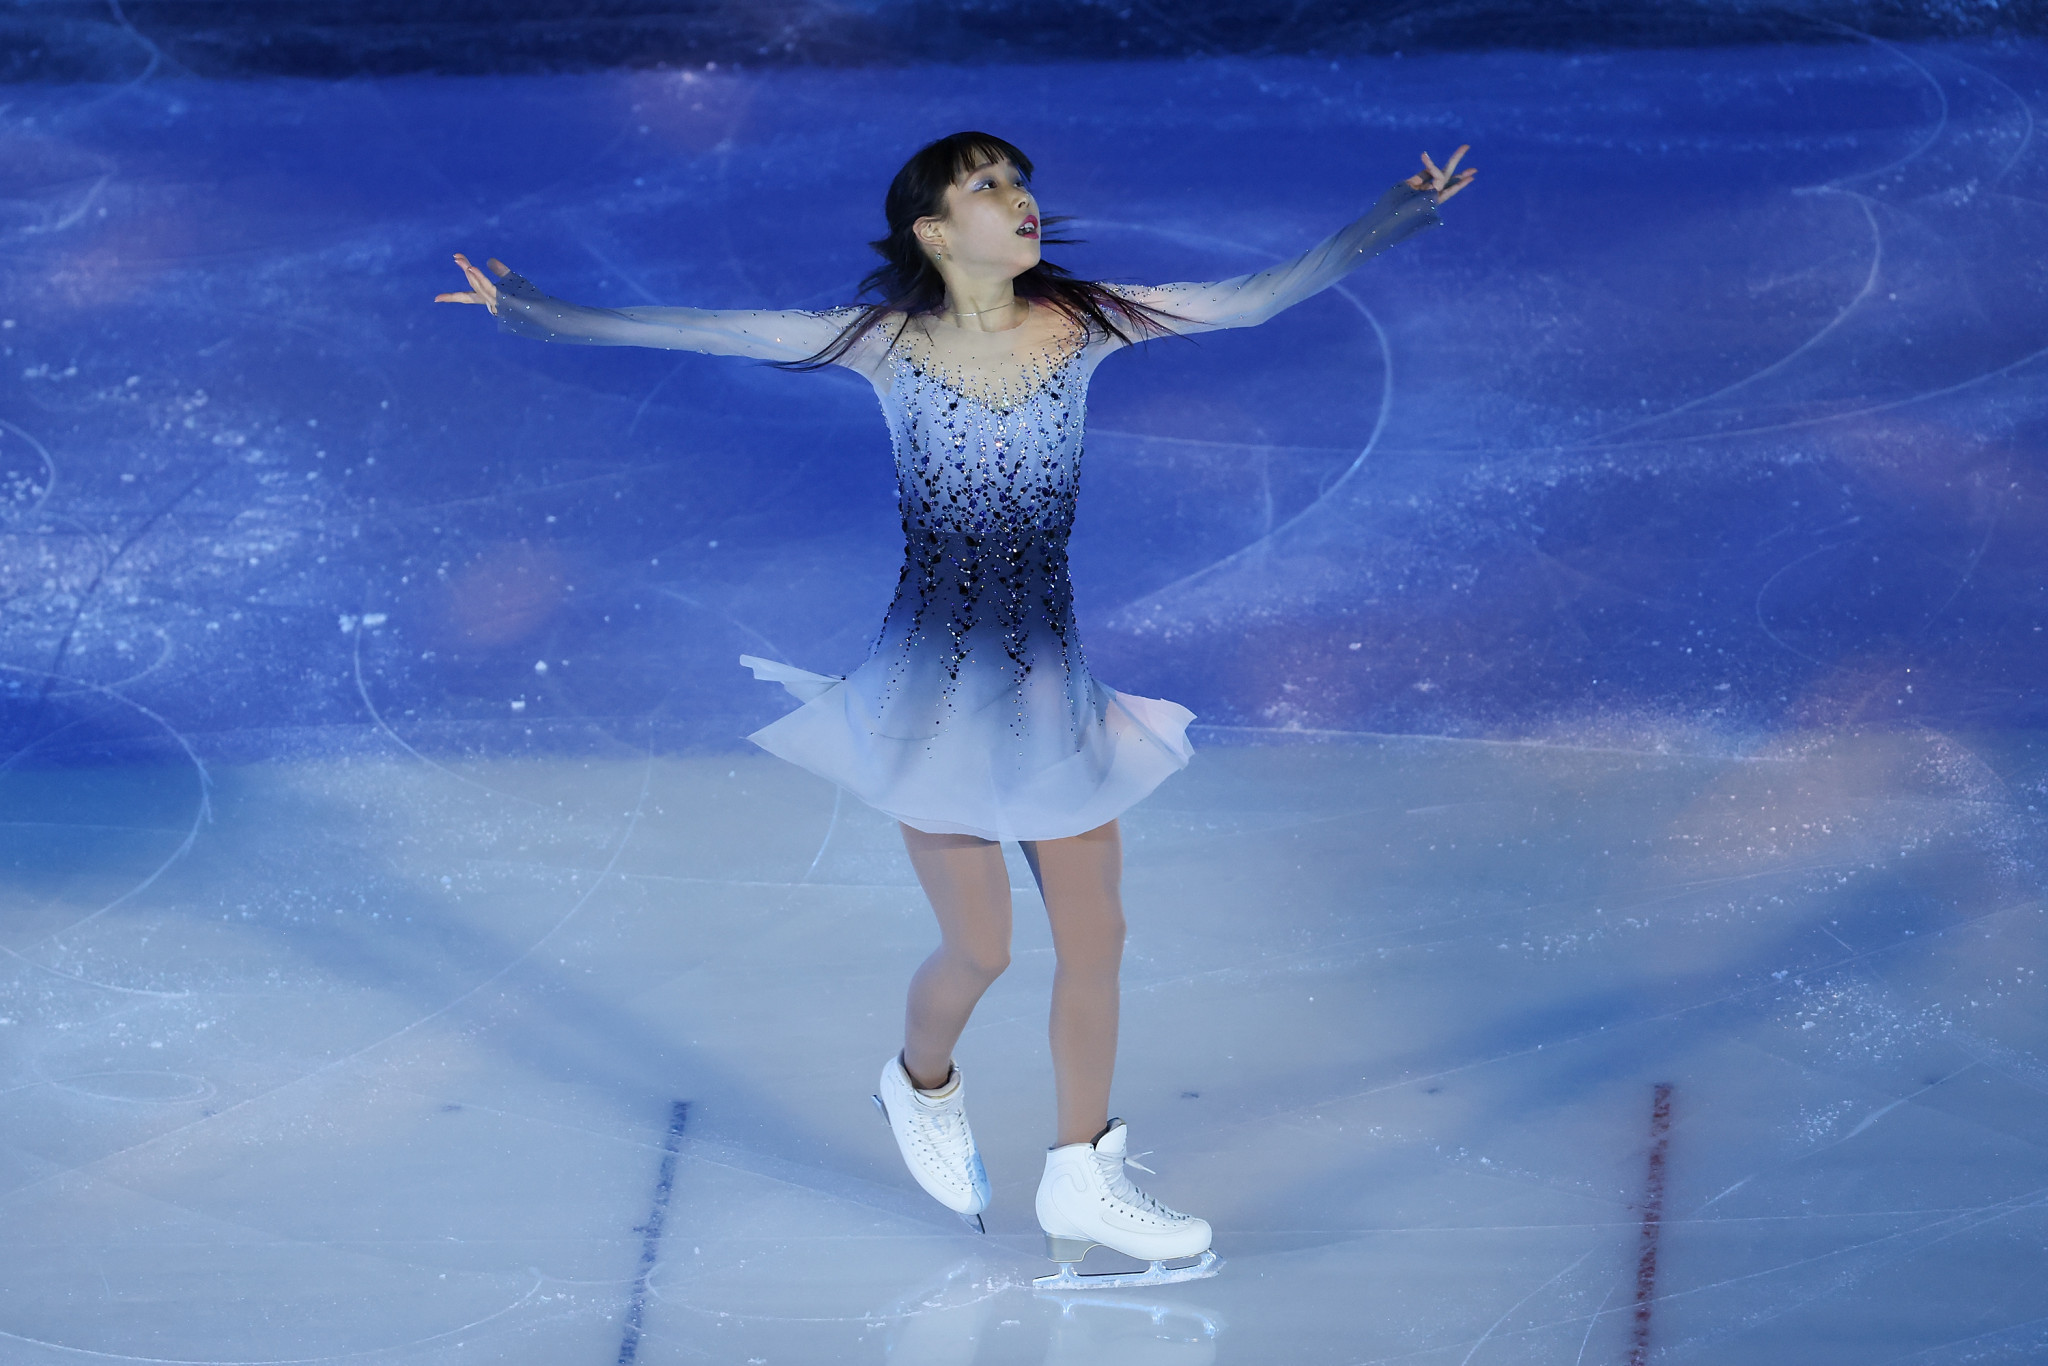 Mai Mihara of Japan won gold with a total score of 204.14 in Espoo ©Getty Images